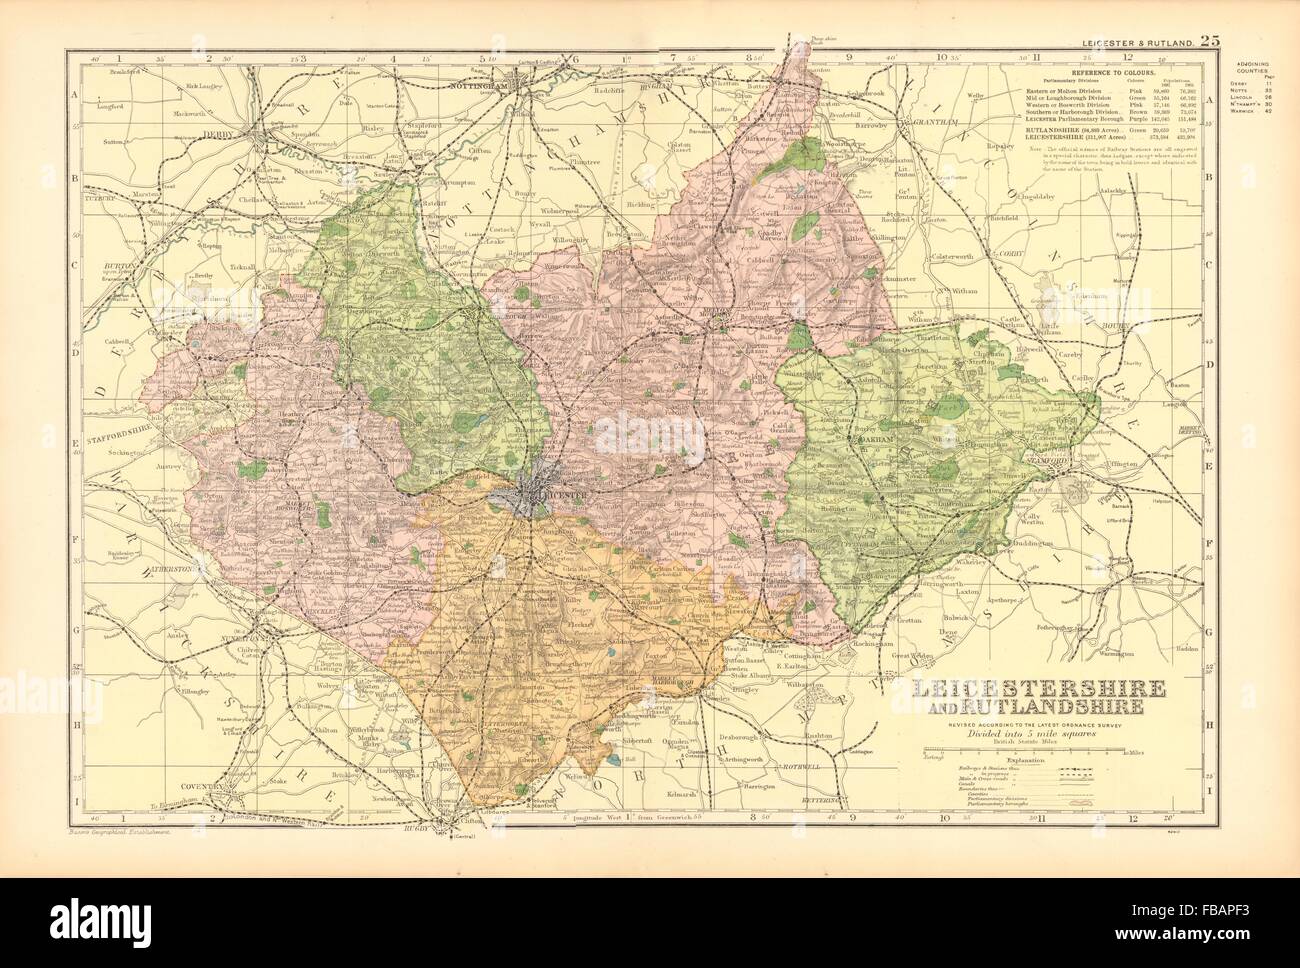 LEICESTERSHIRE AND RUTLANDSHIRE. Parliamentary divisions & parks. BACON 1904 map Stock Photo